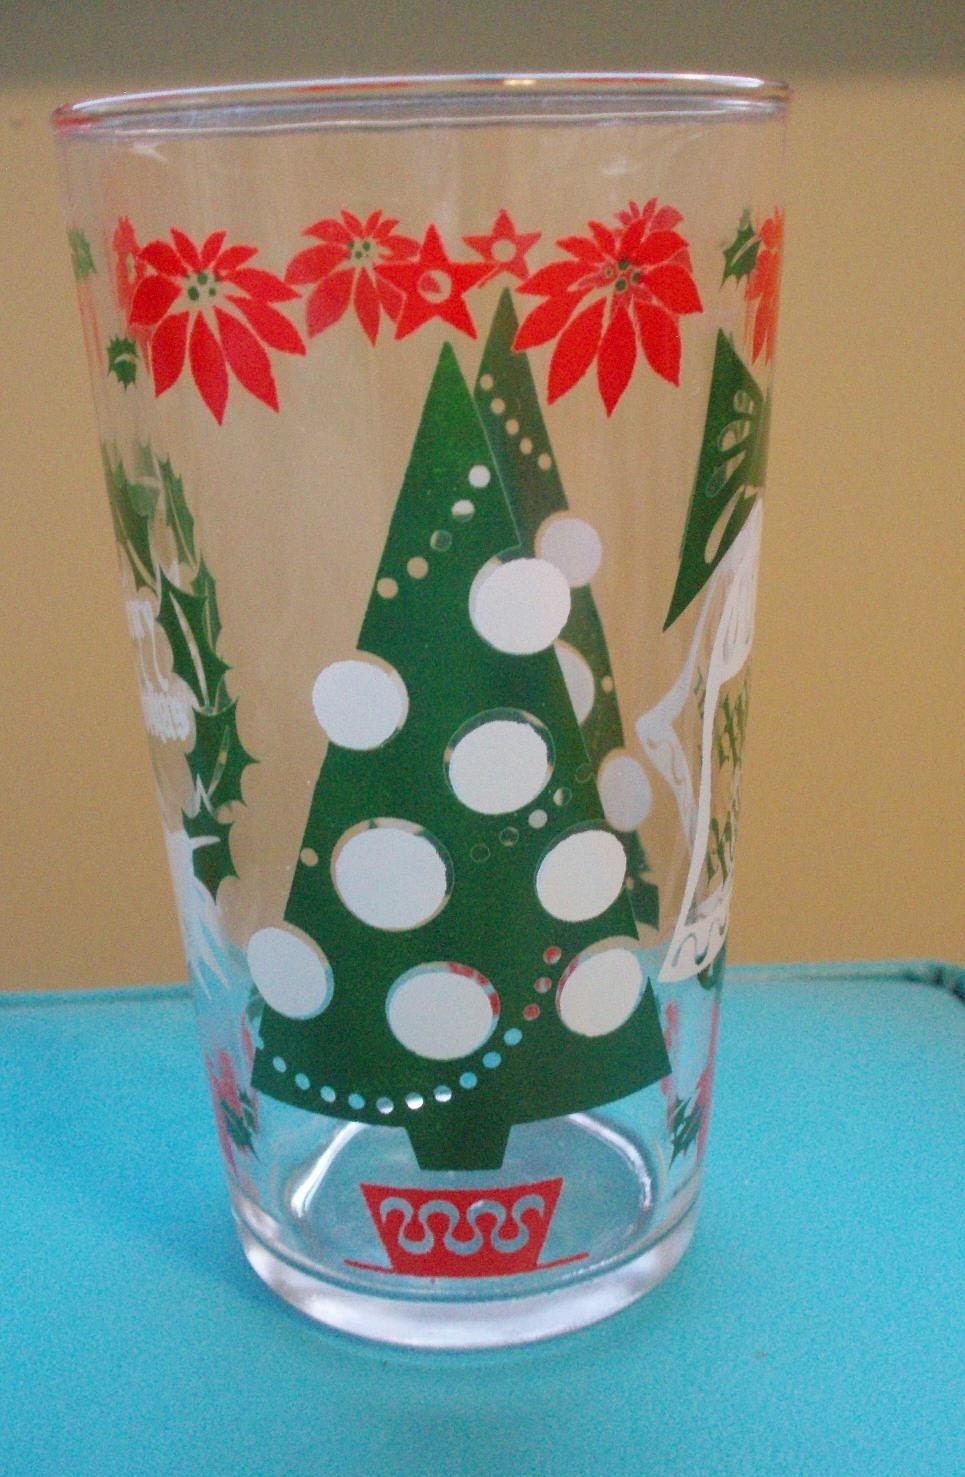 Mid century modern holiday glassware! This set of 4 is a must have for any vintage holiday table setting!